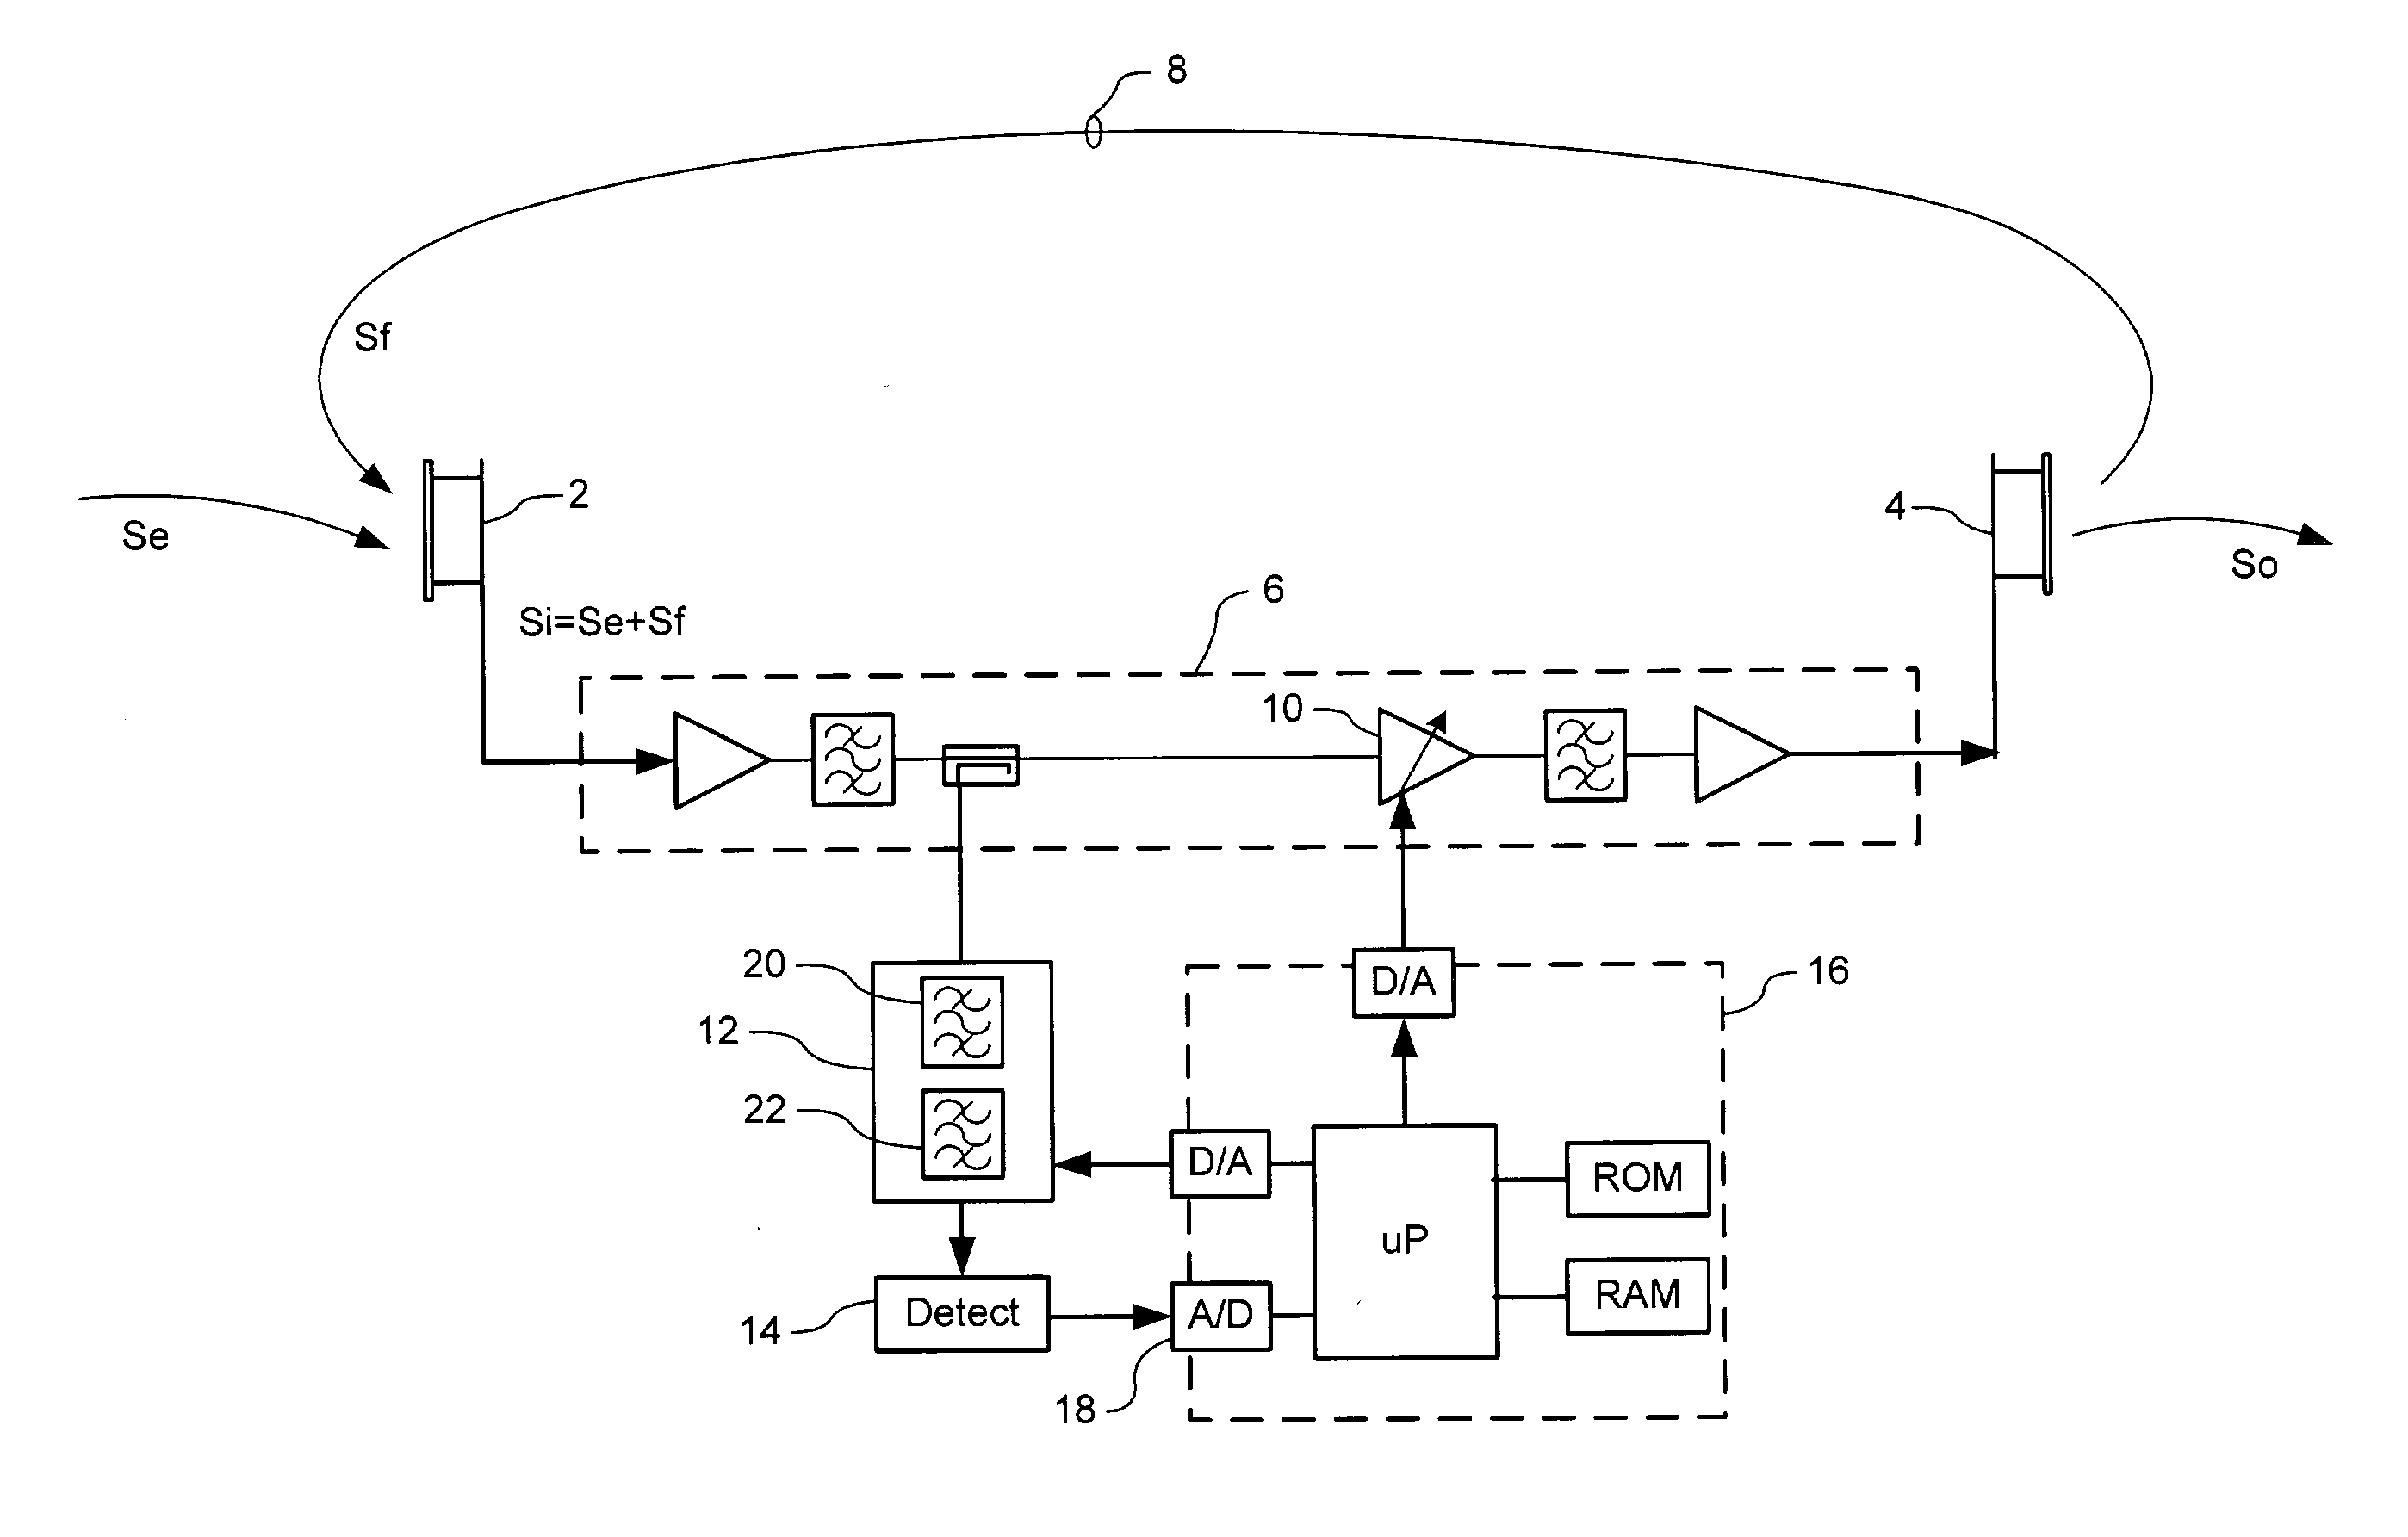 Monitoring stability of an on-frequency repeater